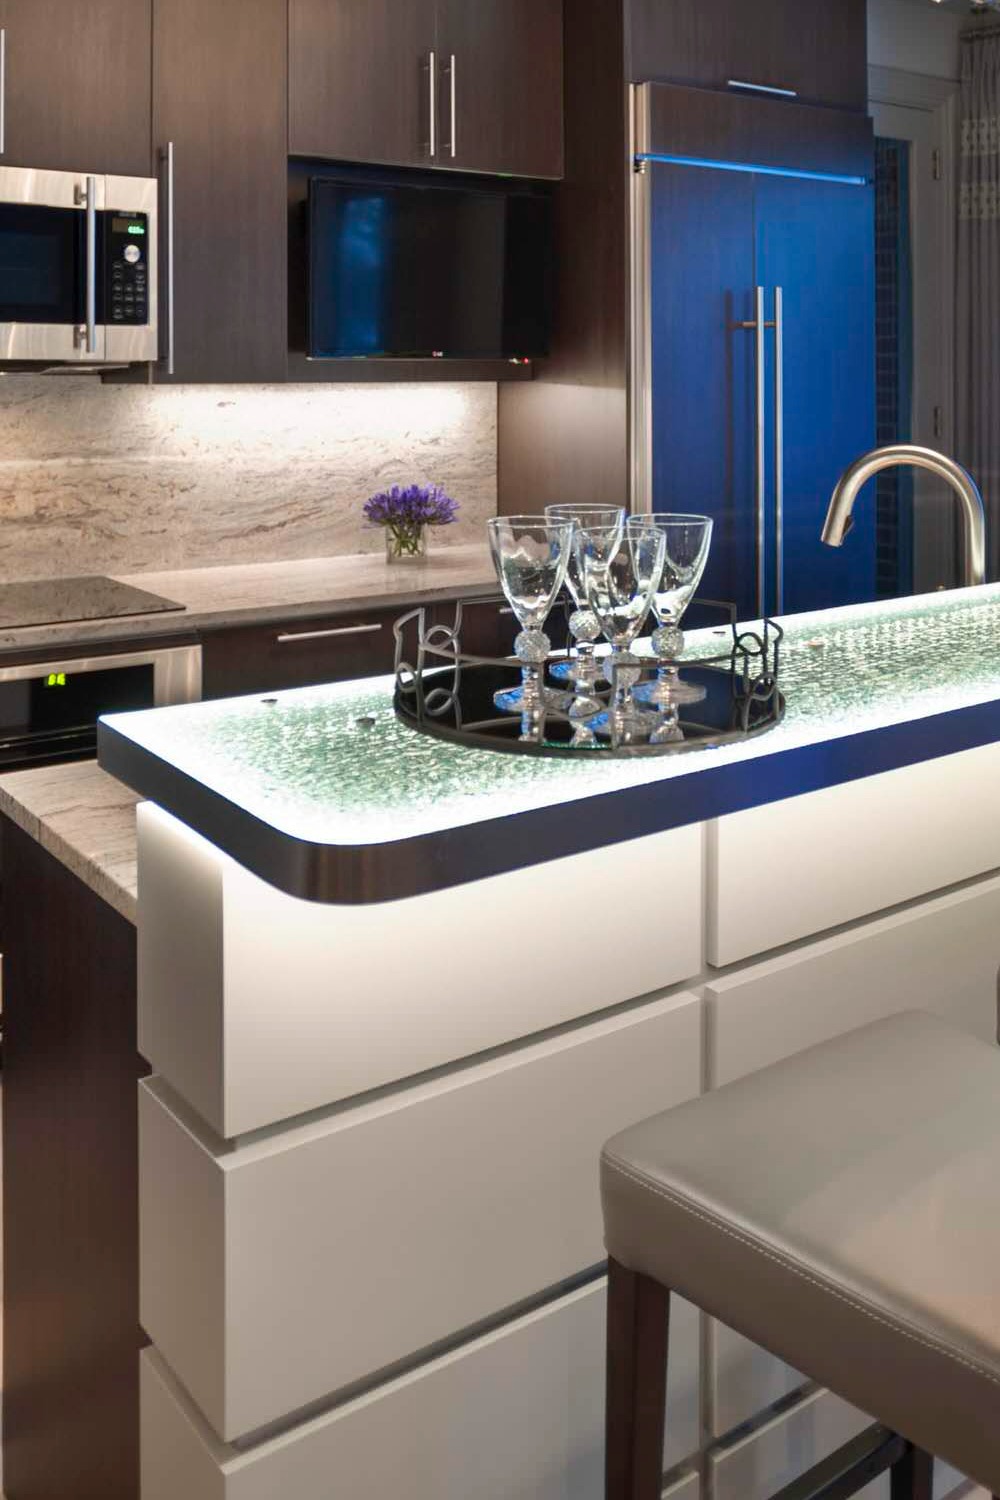 Eased Edging Glass Countertop Crushed Glass Countertops Tempered Glass Create Eye Catching Materials